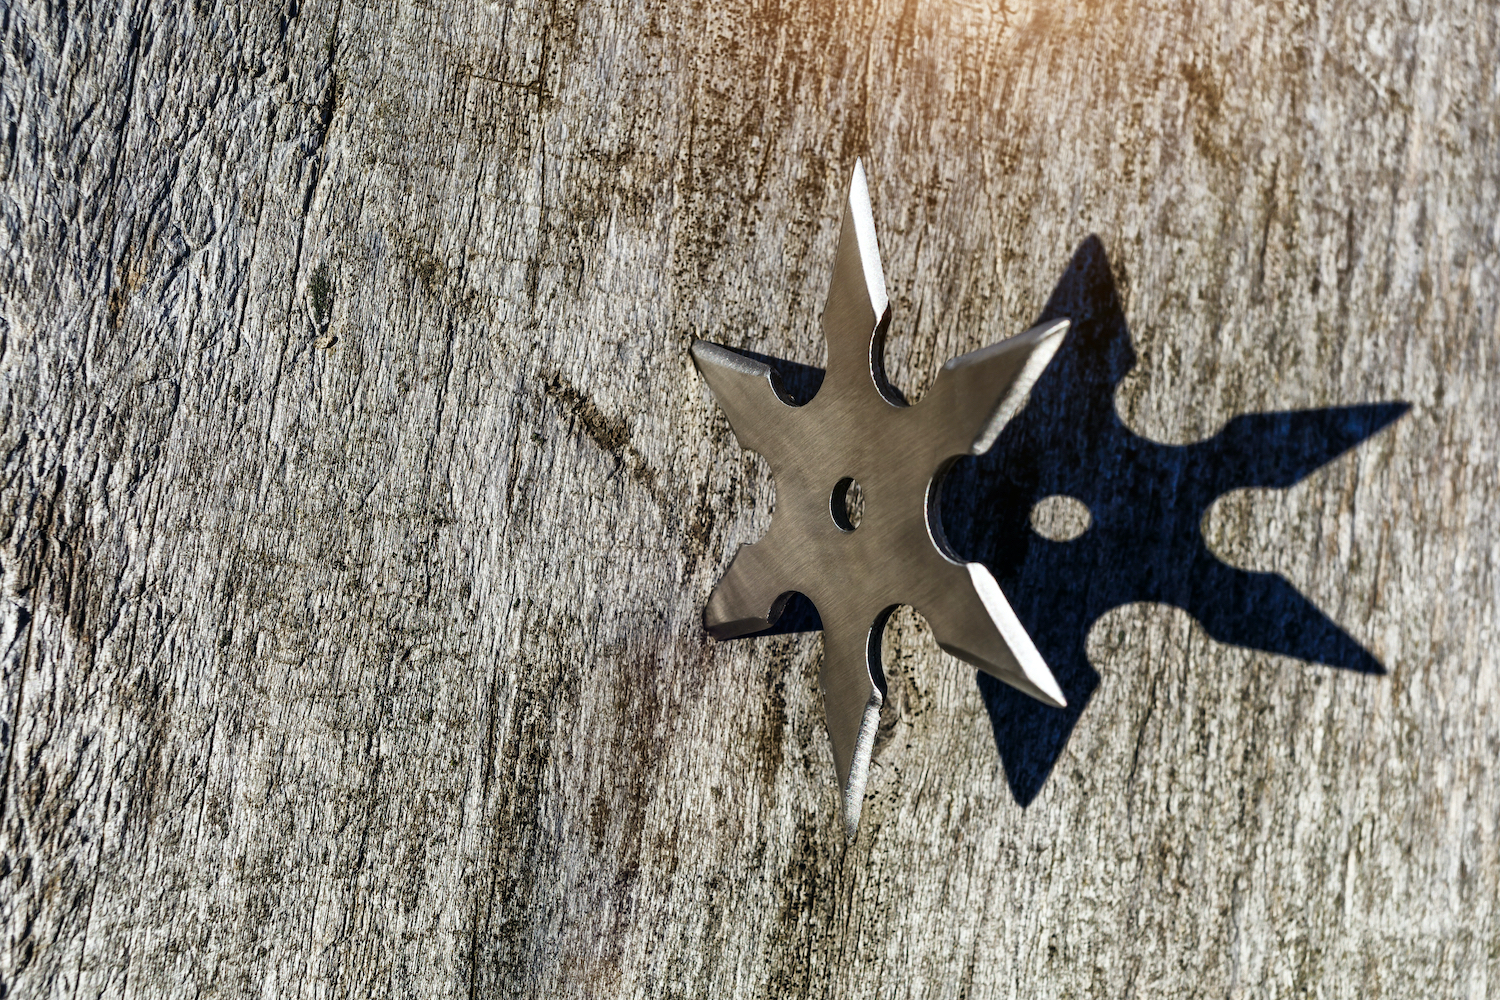 Shuriken (throwing star), a traditional Japanese ninja cold weapon stuck in the wooden background, Silver shuriken with a star shape. Samurai, throwing weapons